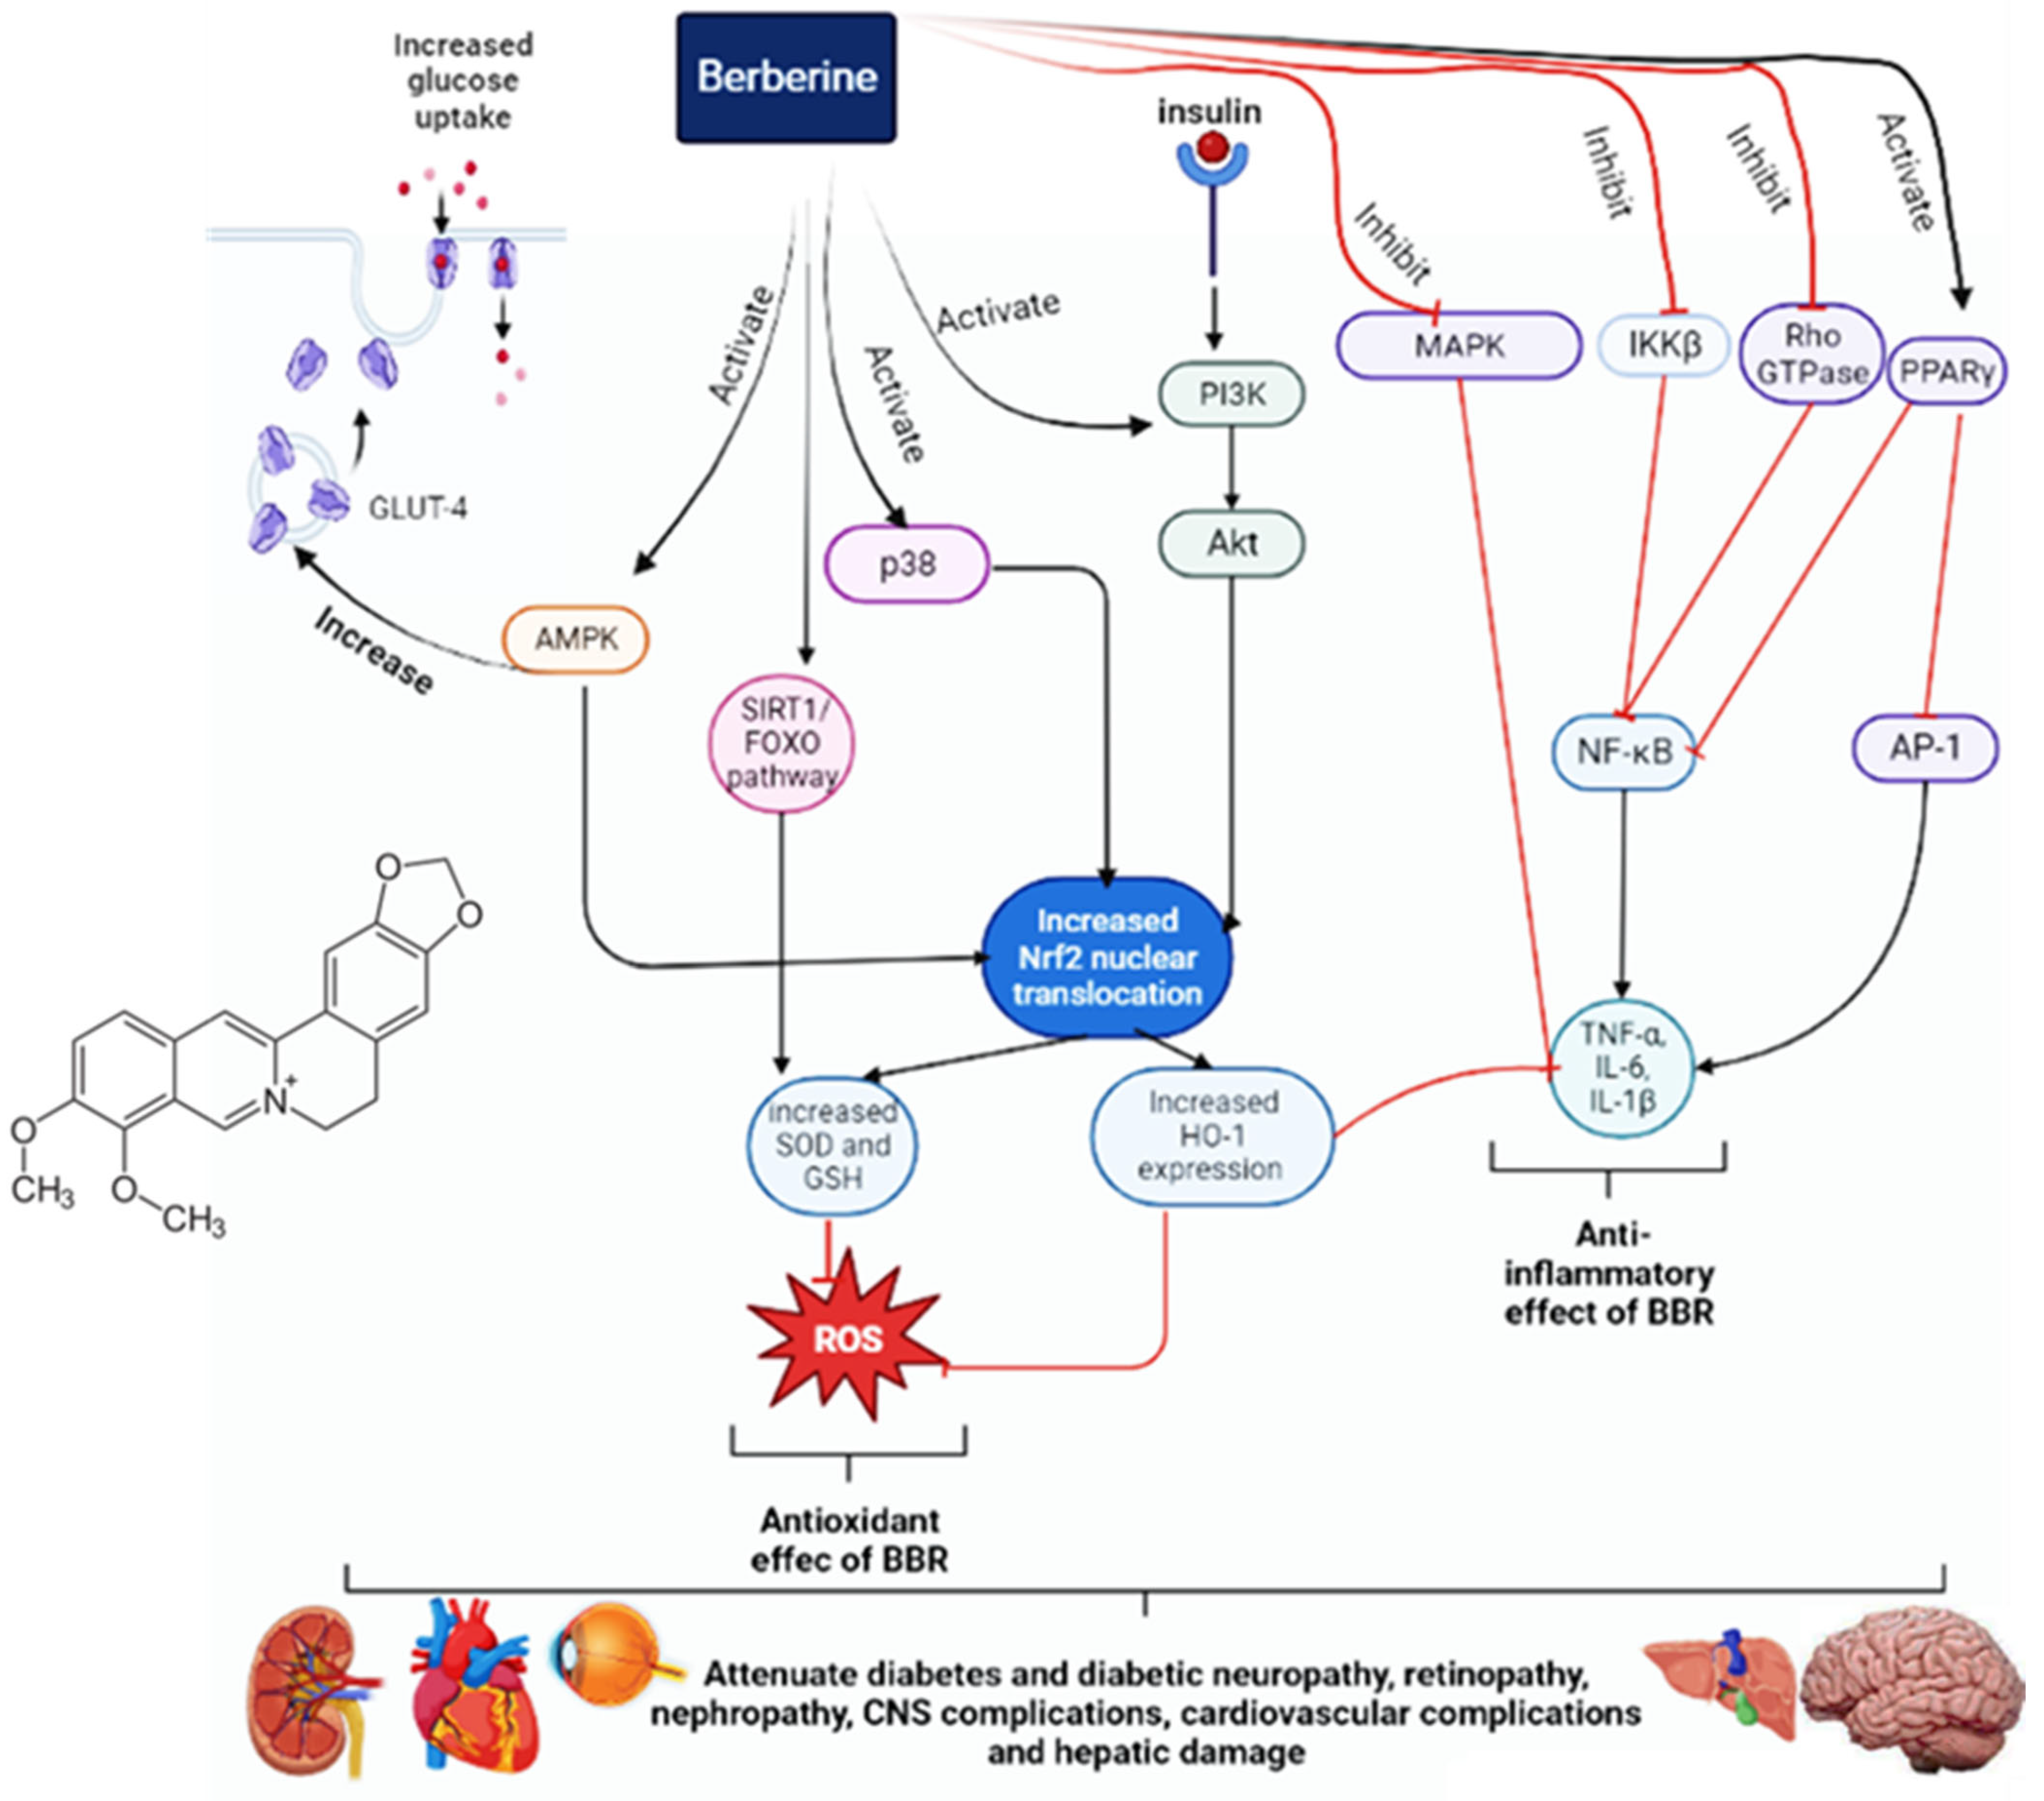 Pharmaceuticals | Free Full-Text | A Mechanistic Review on How Berberine  Use Combats Diabetes and Related Complications: Molecular, Cellular, and  Metabolic Effects